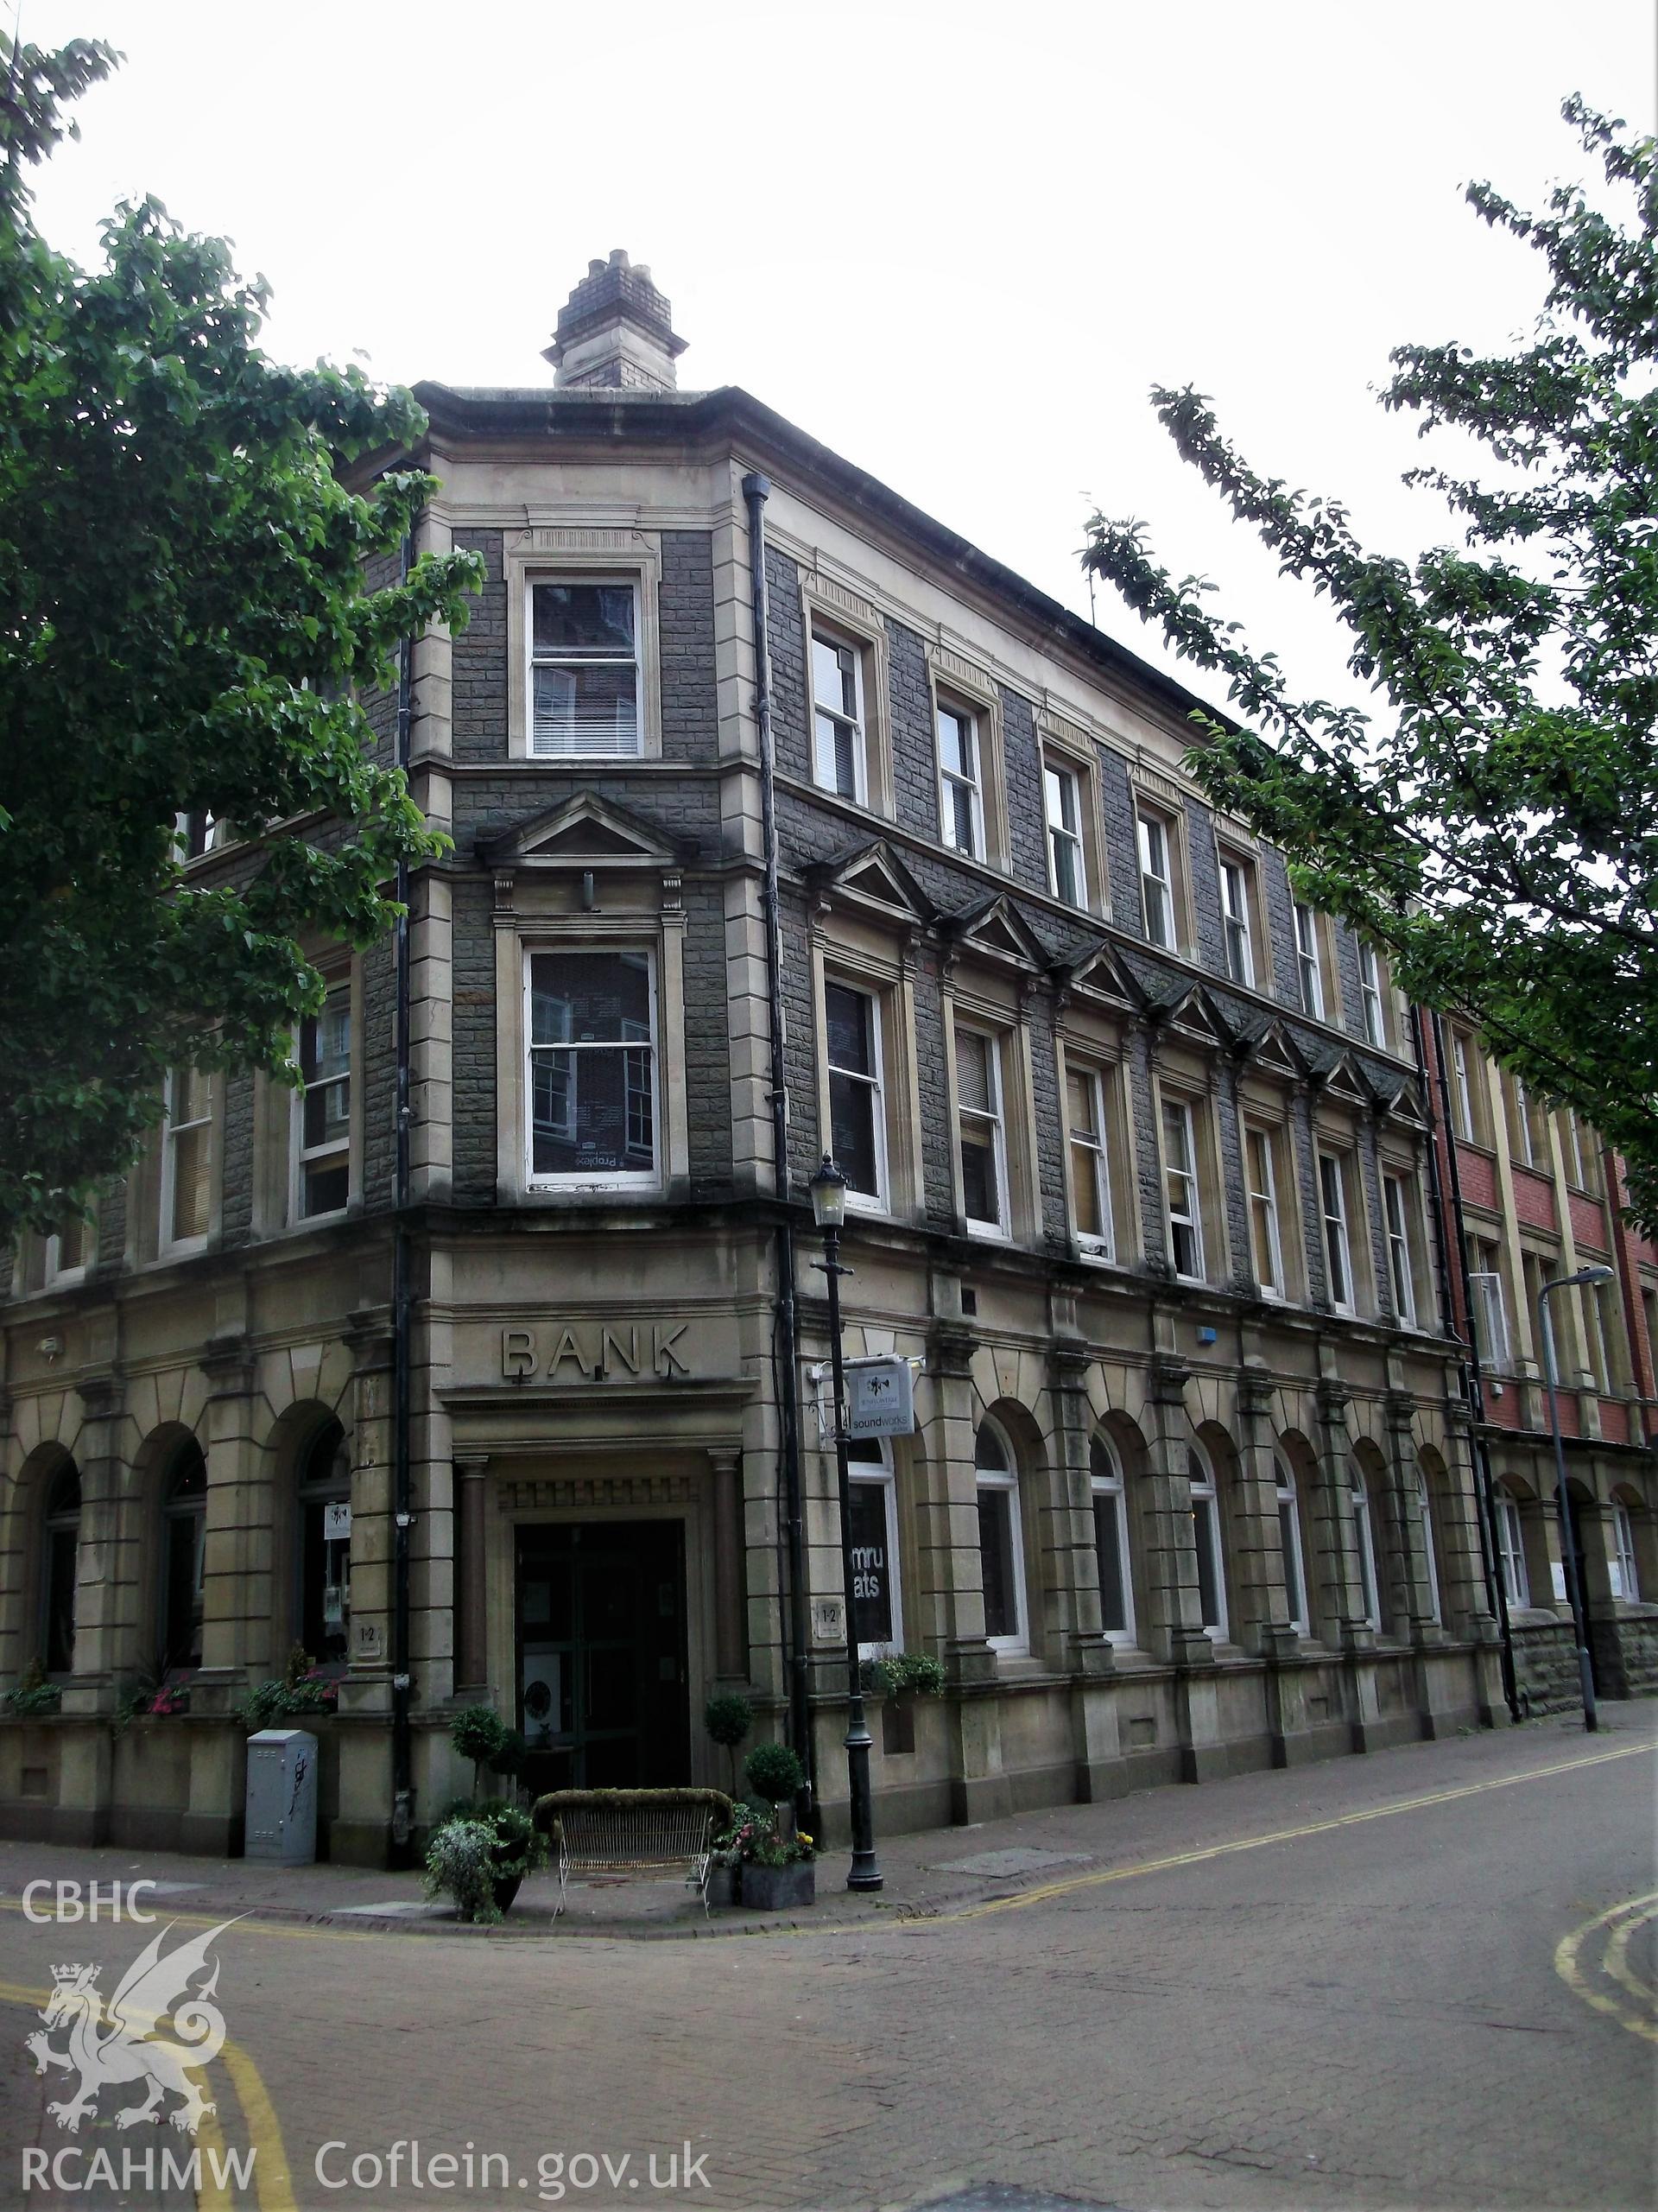 Colour photograph showing exterior of Lloyd's Bank, Mount Stuart Square, Butetown, taken by Adam Coward on 10th July 2018.